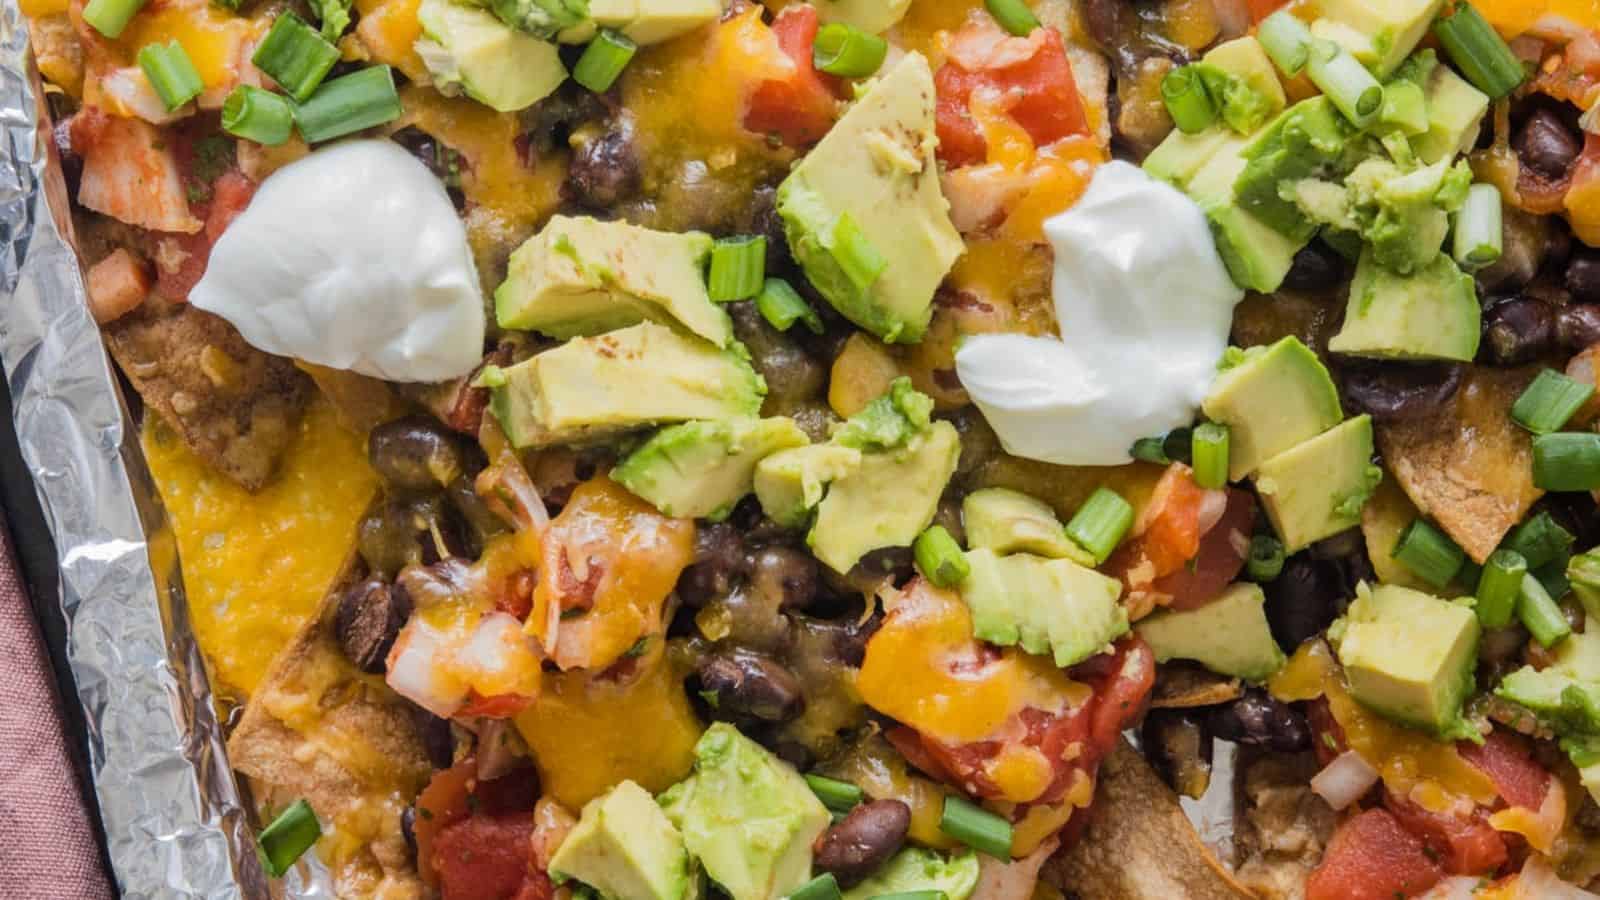 A close-up imag of loaded nachos topped with melted cheese, avocado chunks, black beans, diced tomatoes, green onions, and dollops of sour cream.